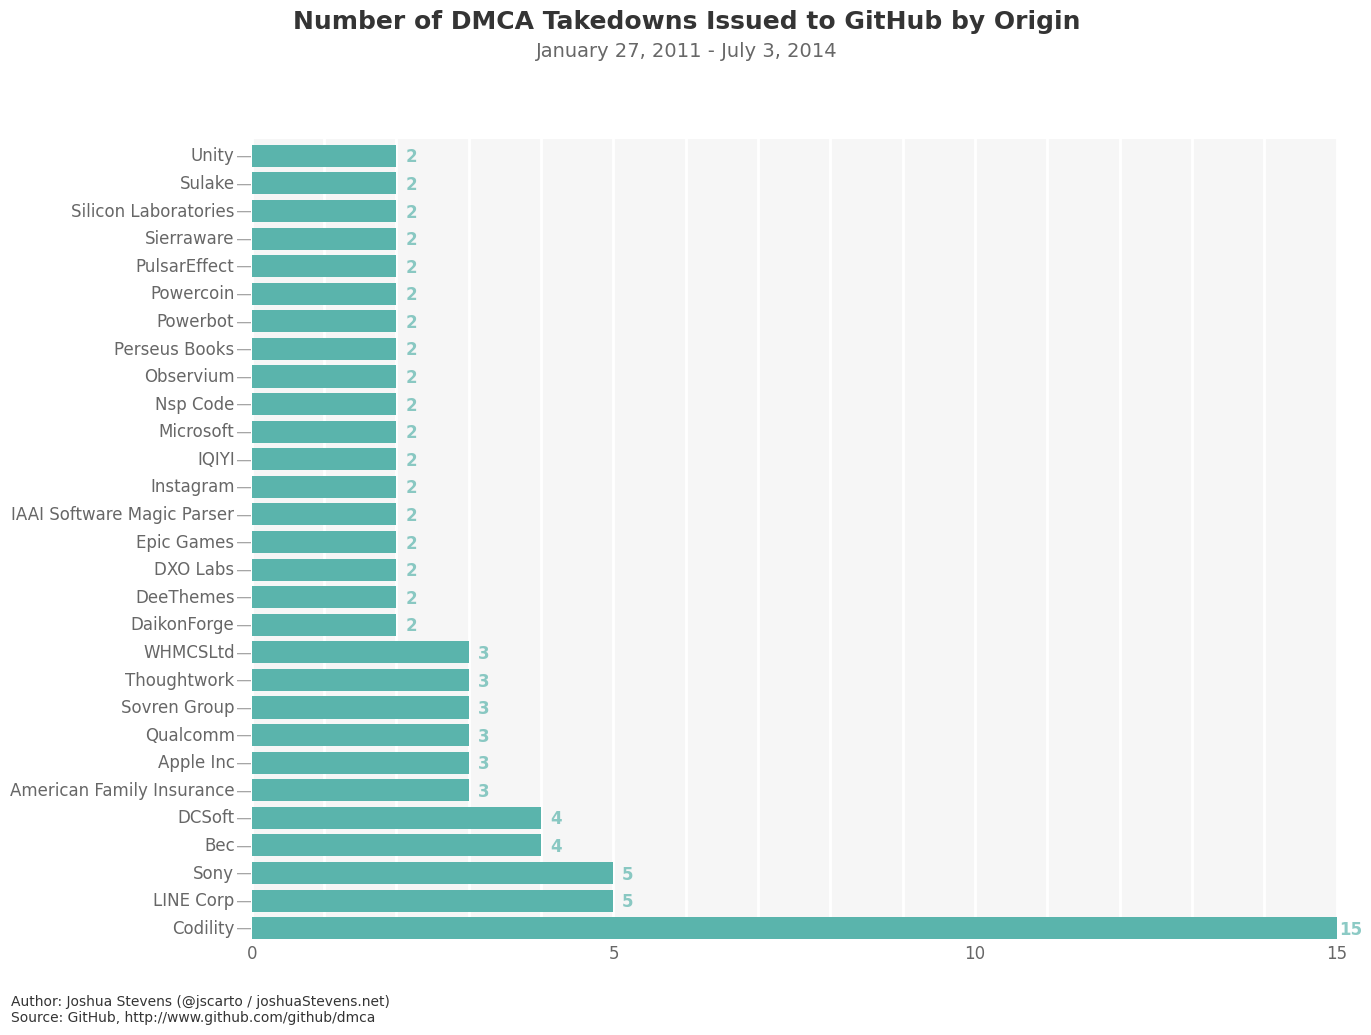 Who is issuing the most DMCA takedowns to GitHub?